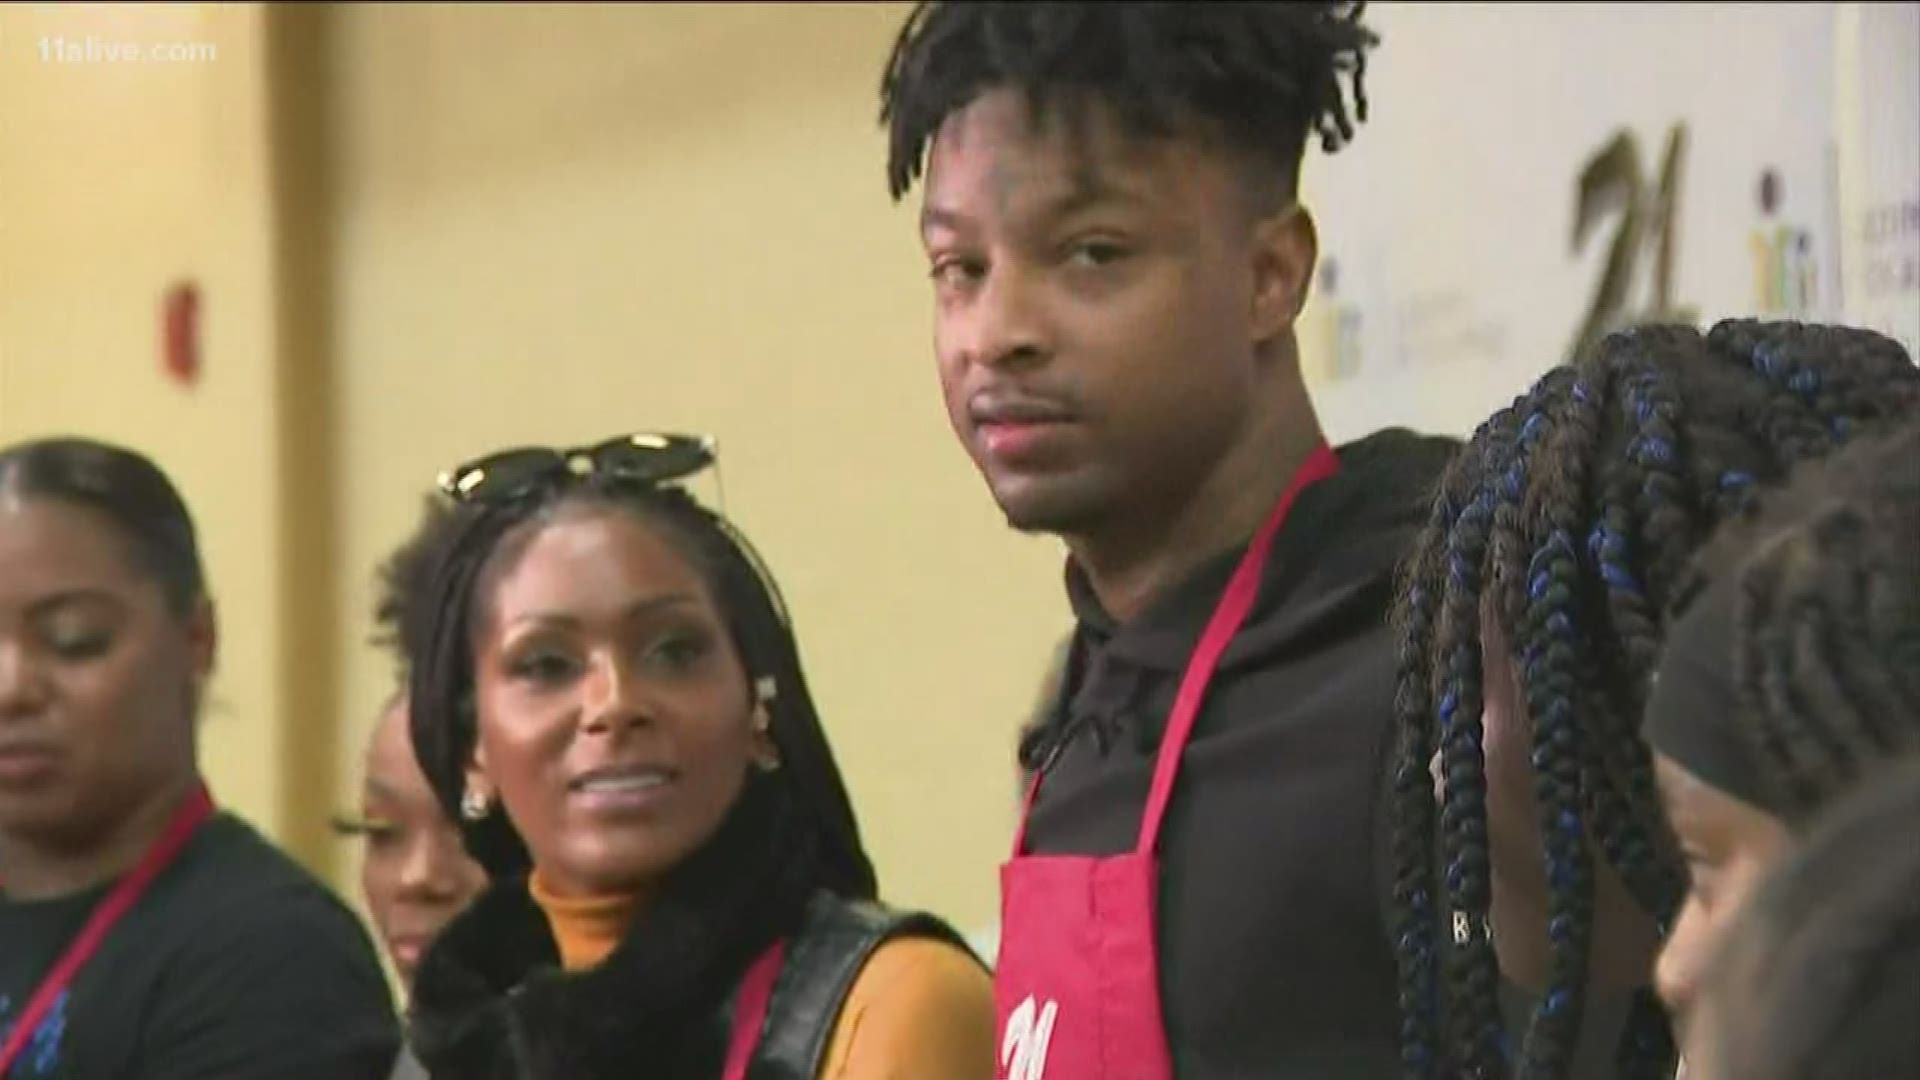 The Atlanta rapper and humanitarian helped feed the community at a DeKalb County YMCA on Tuesday night.